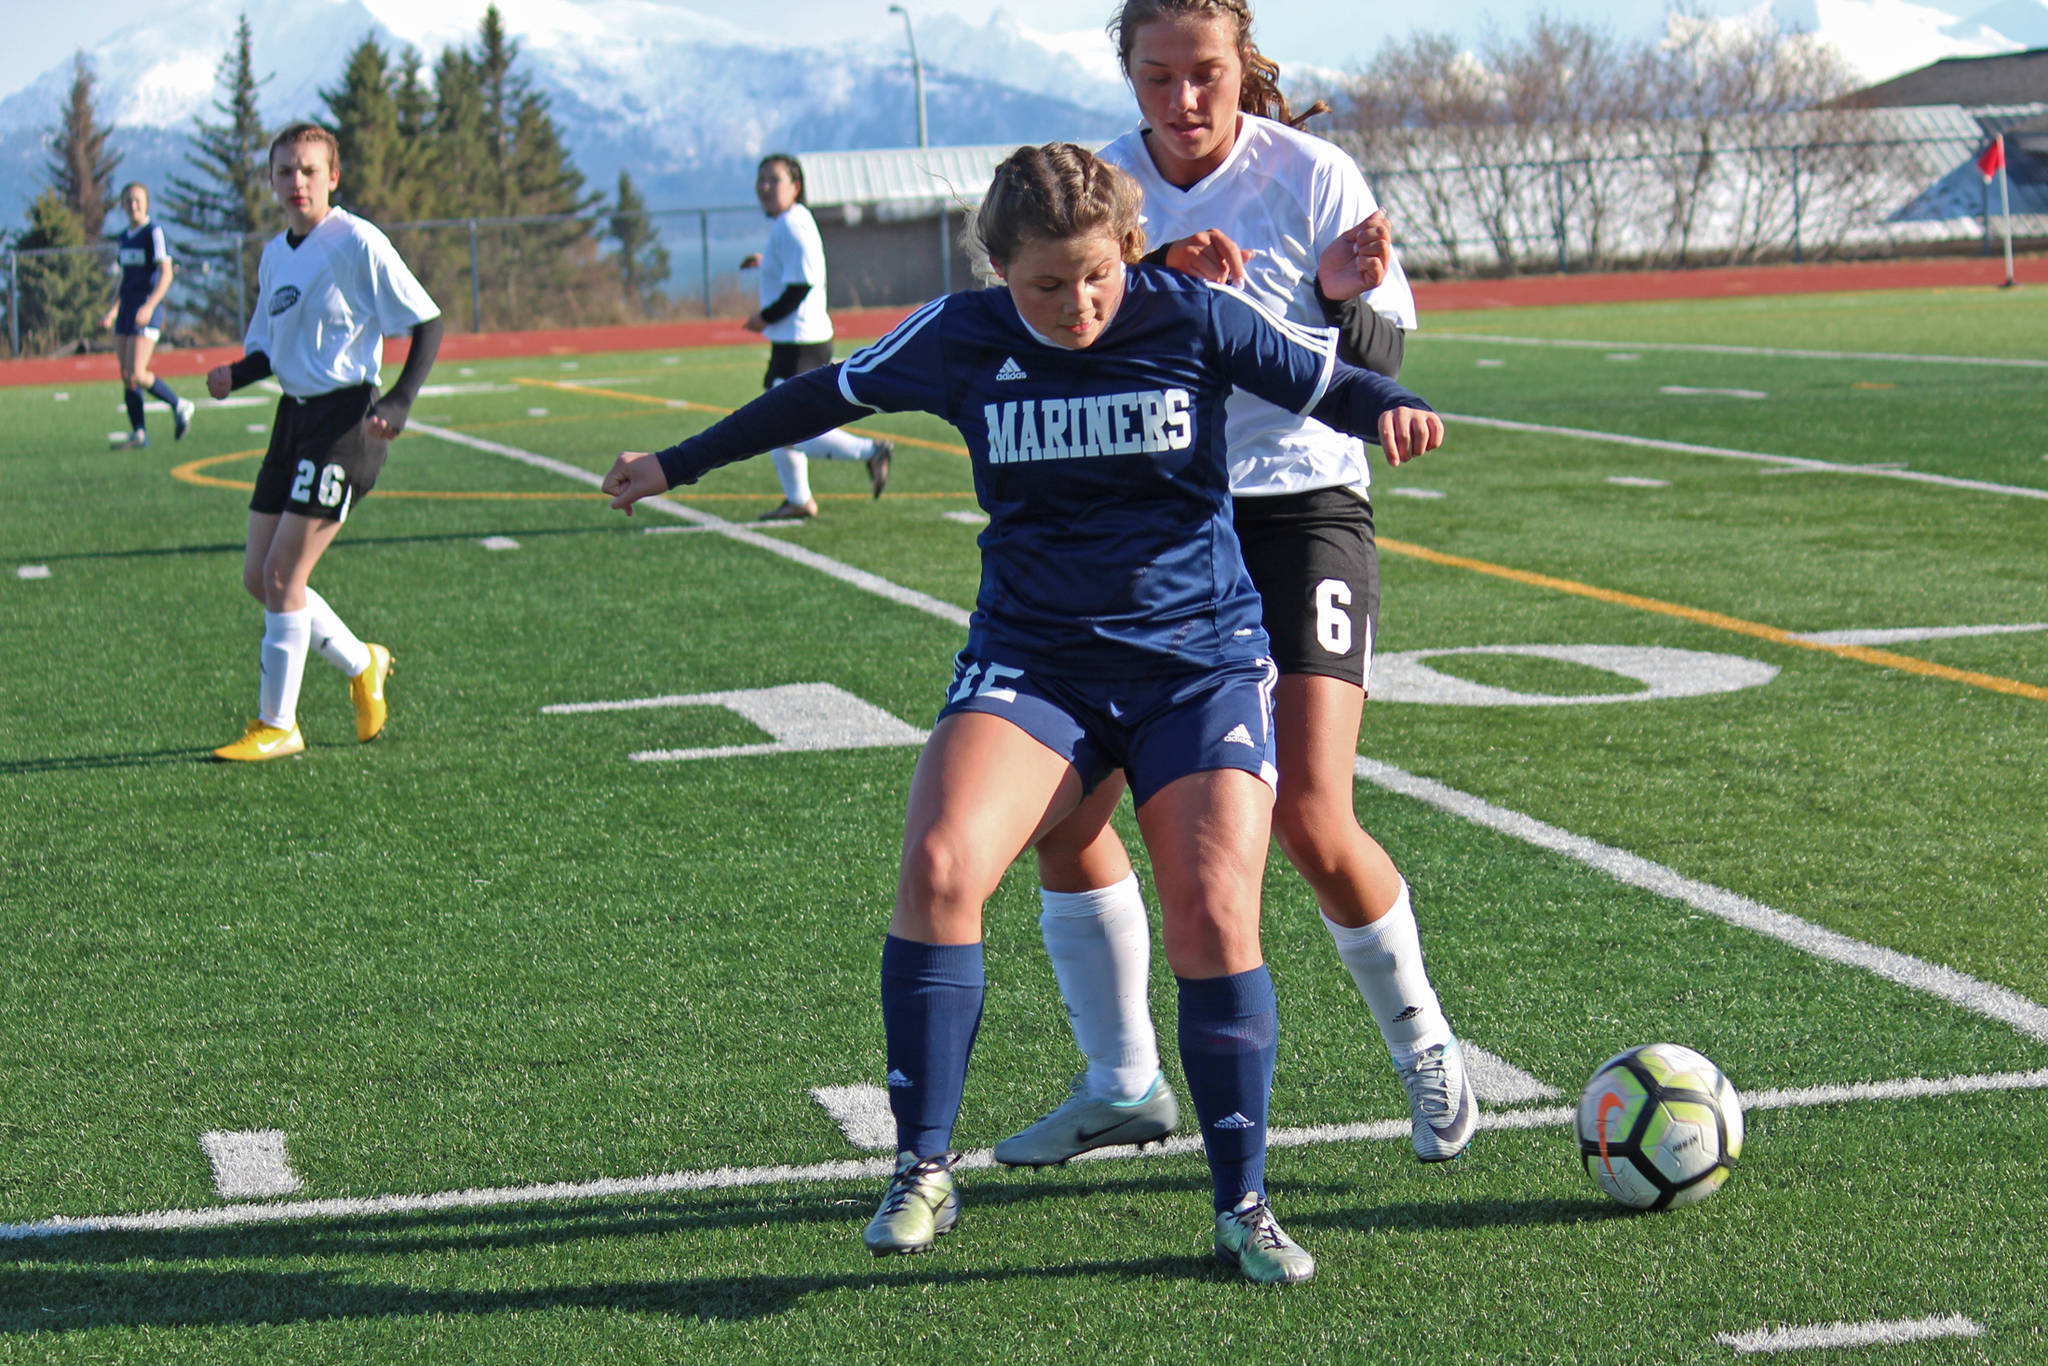 Homer’s Rylee Doughty gets in front of Nikiski’s Emma Wik while battling for the ball during a Tuesday, April 23, 2019 game at Homer High School in Homer, Alaska. (Photo by Megan Pacer/Homer News)